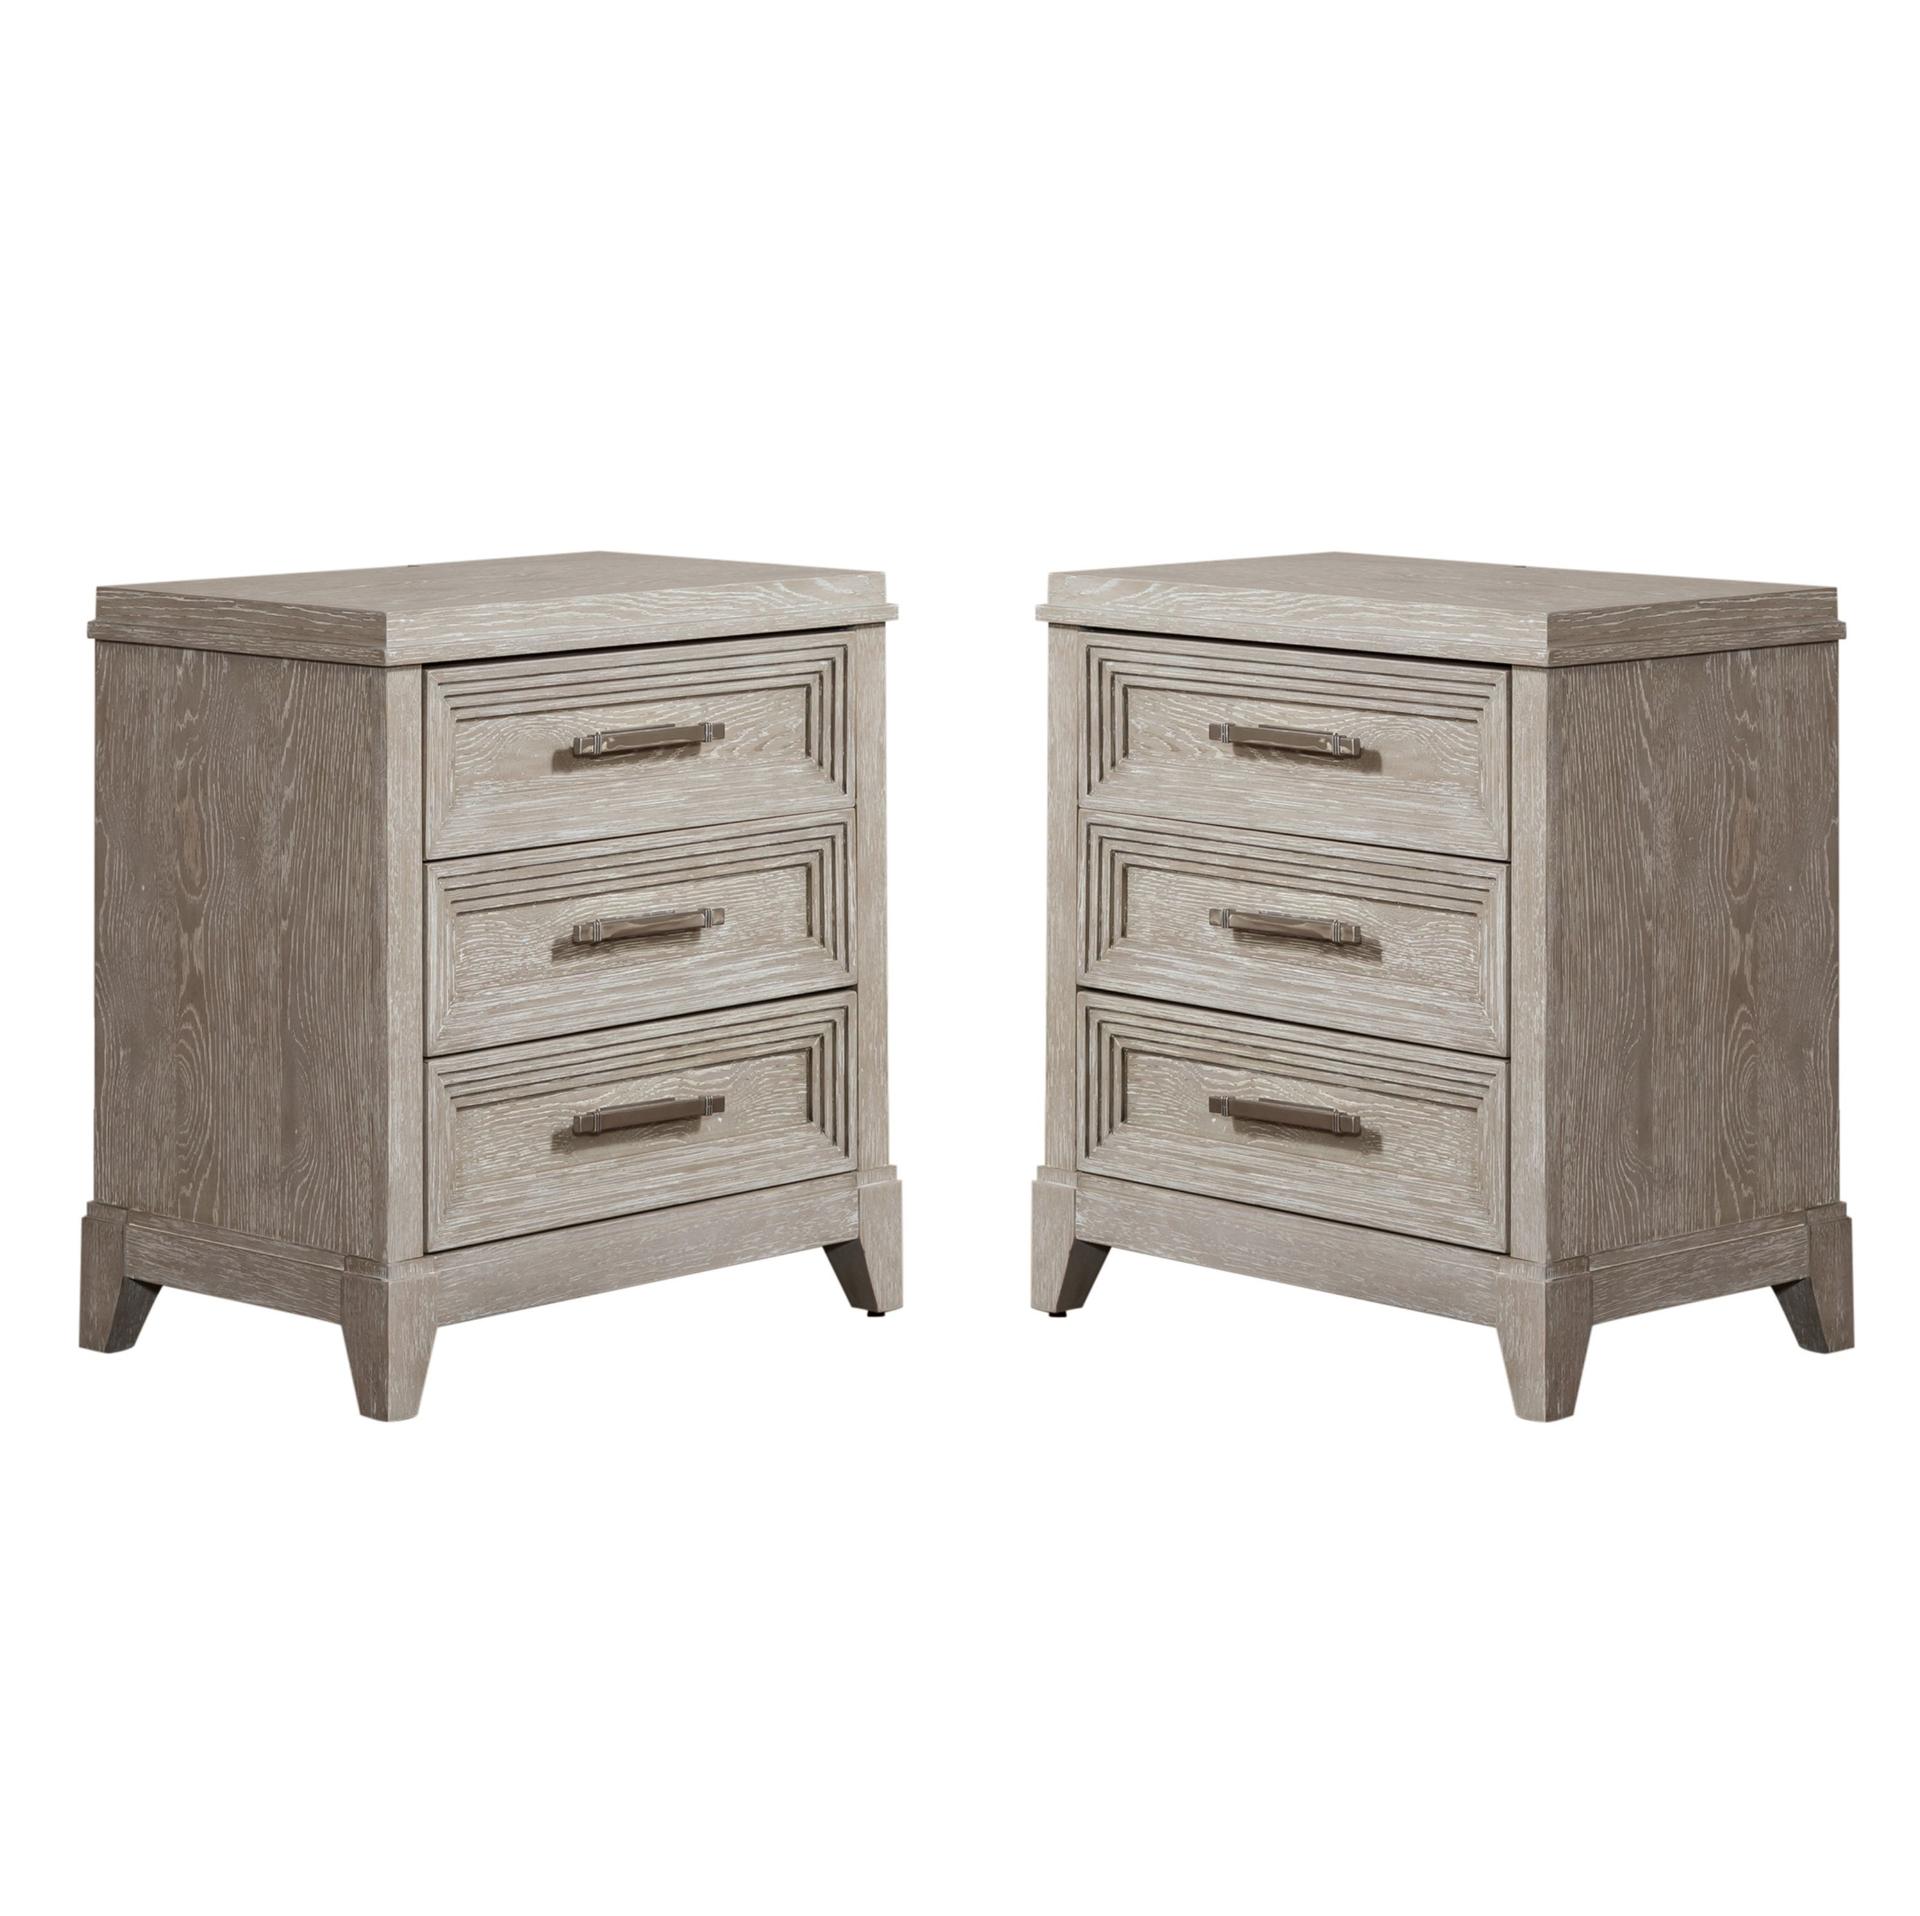 Transitional Nightstand Set Belmar 902-BR61 902-BR61-Set-2 in Taupe 